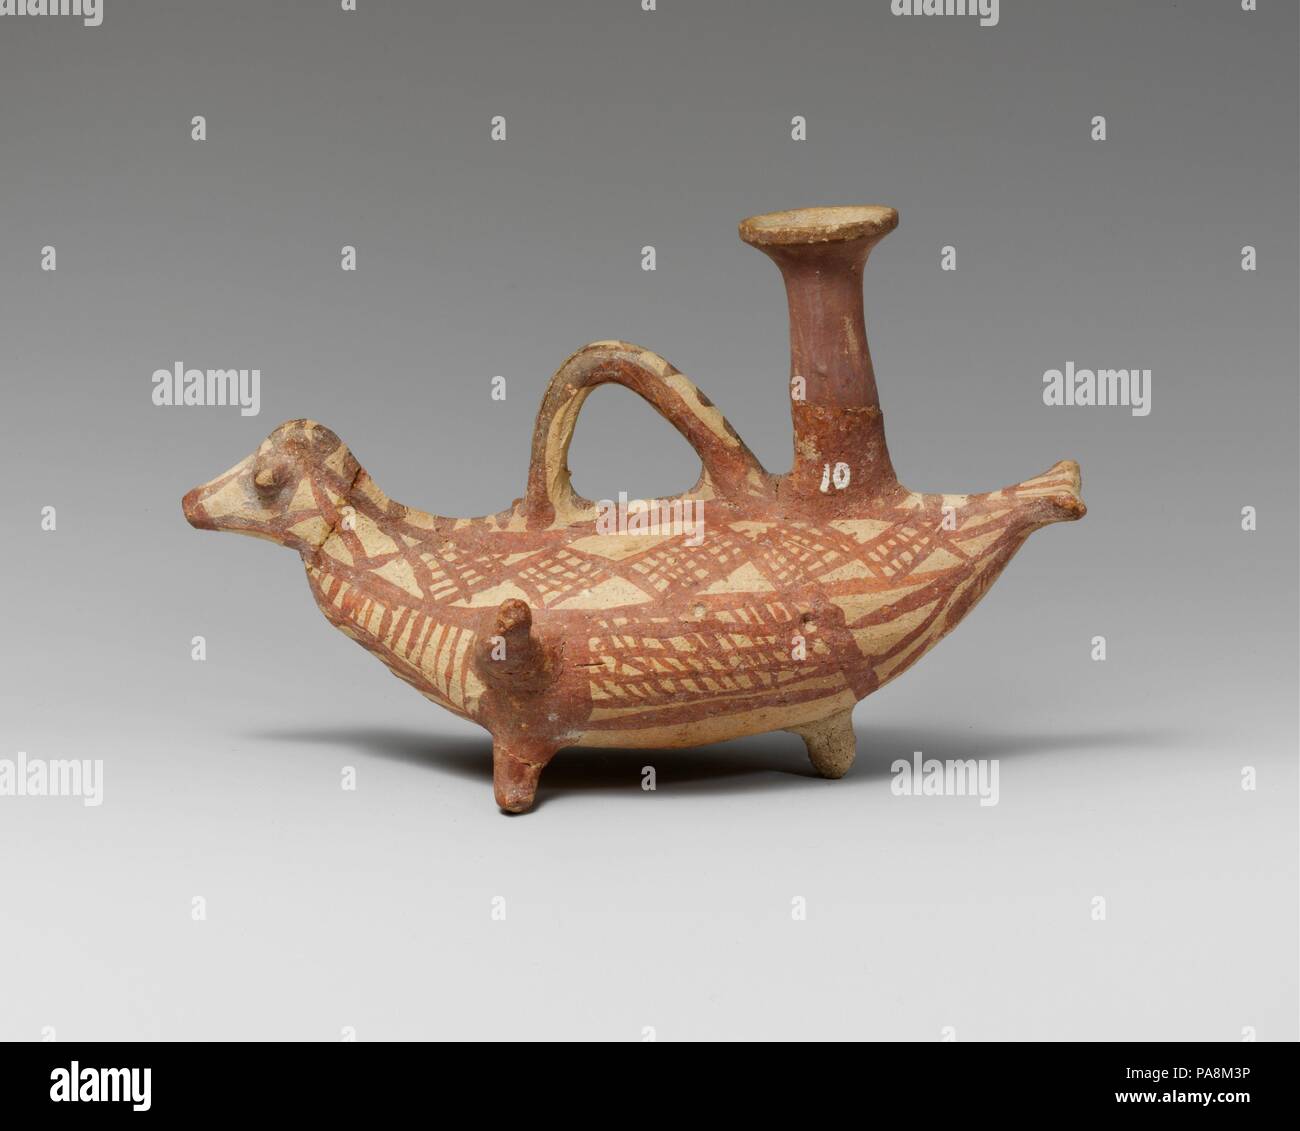 Terracotta askos (flask with a spout and handle over the top) in the form of a bird. Culture: Cypriot. Dimensions: H. 4 7/16 in. (11.3 cm). Date: 1200-1050 B.C..  Three feet, with tubular spout and geometric ornament. Museum: Metropolitan Museum of Art, New York, USA. Stock Photo